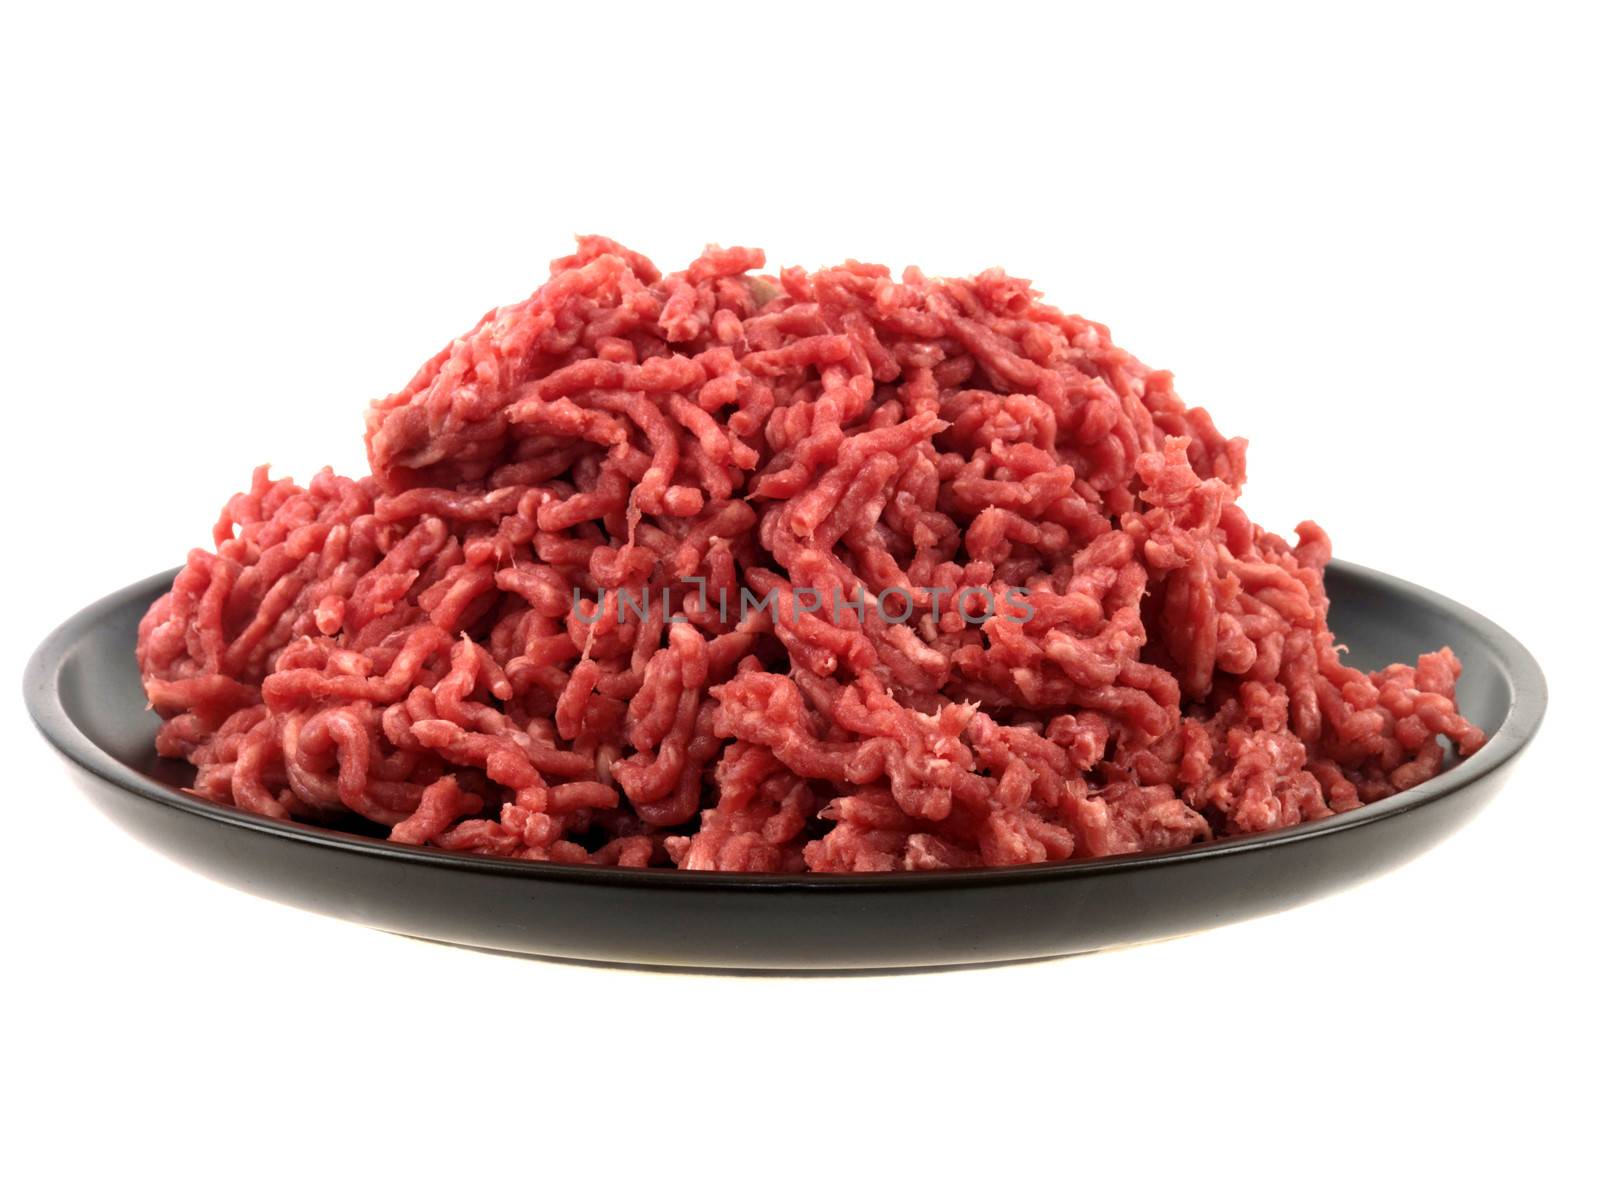 Minced Beef by Whiteboxmedia